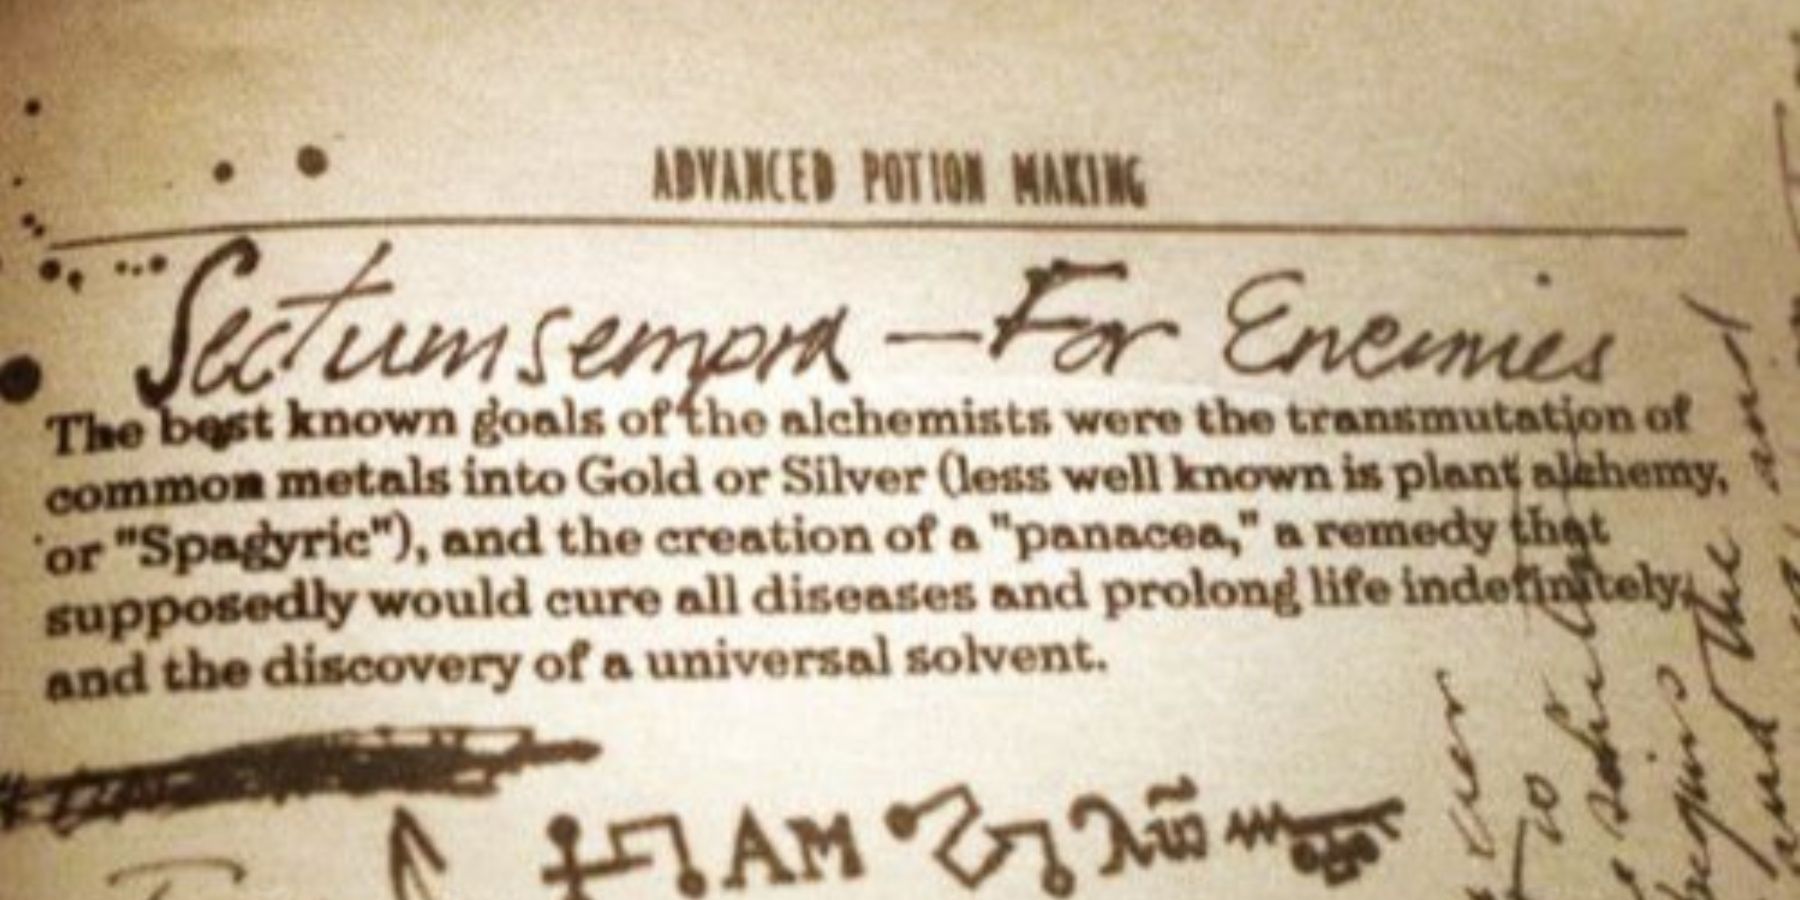 The Sectumsempra spell is recorded in Advanced Potion-Making in Harry Potter.